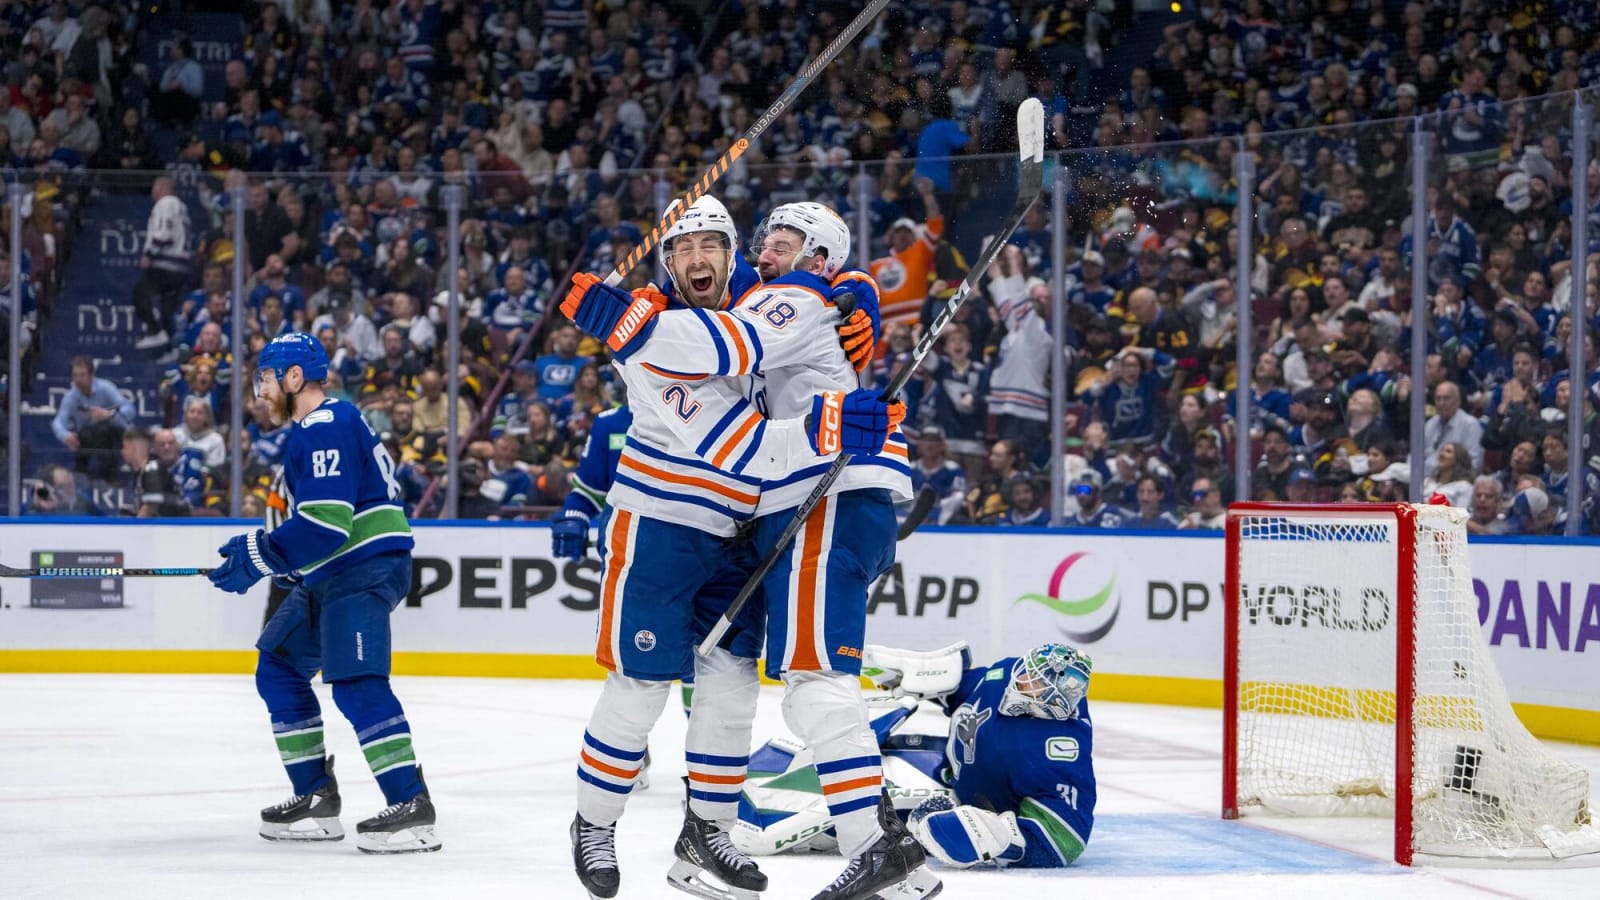 Bouchard Breaks Tie in Overtime, Oilers Even Series With Canucks